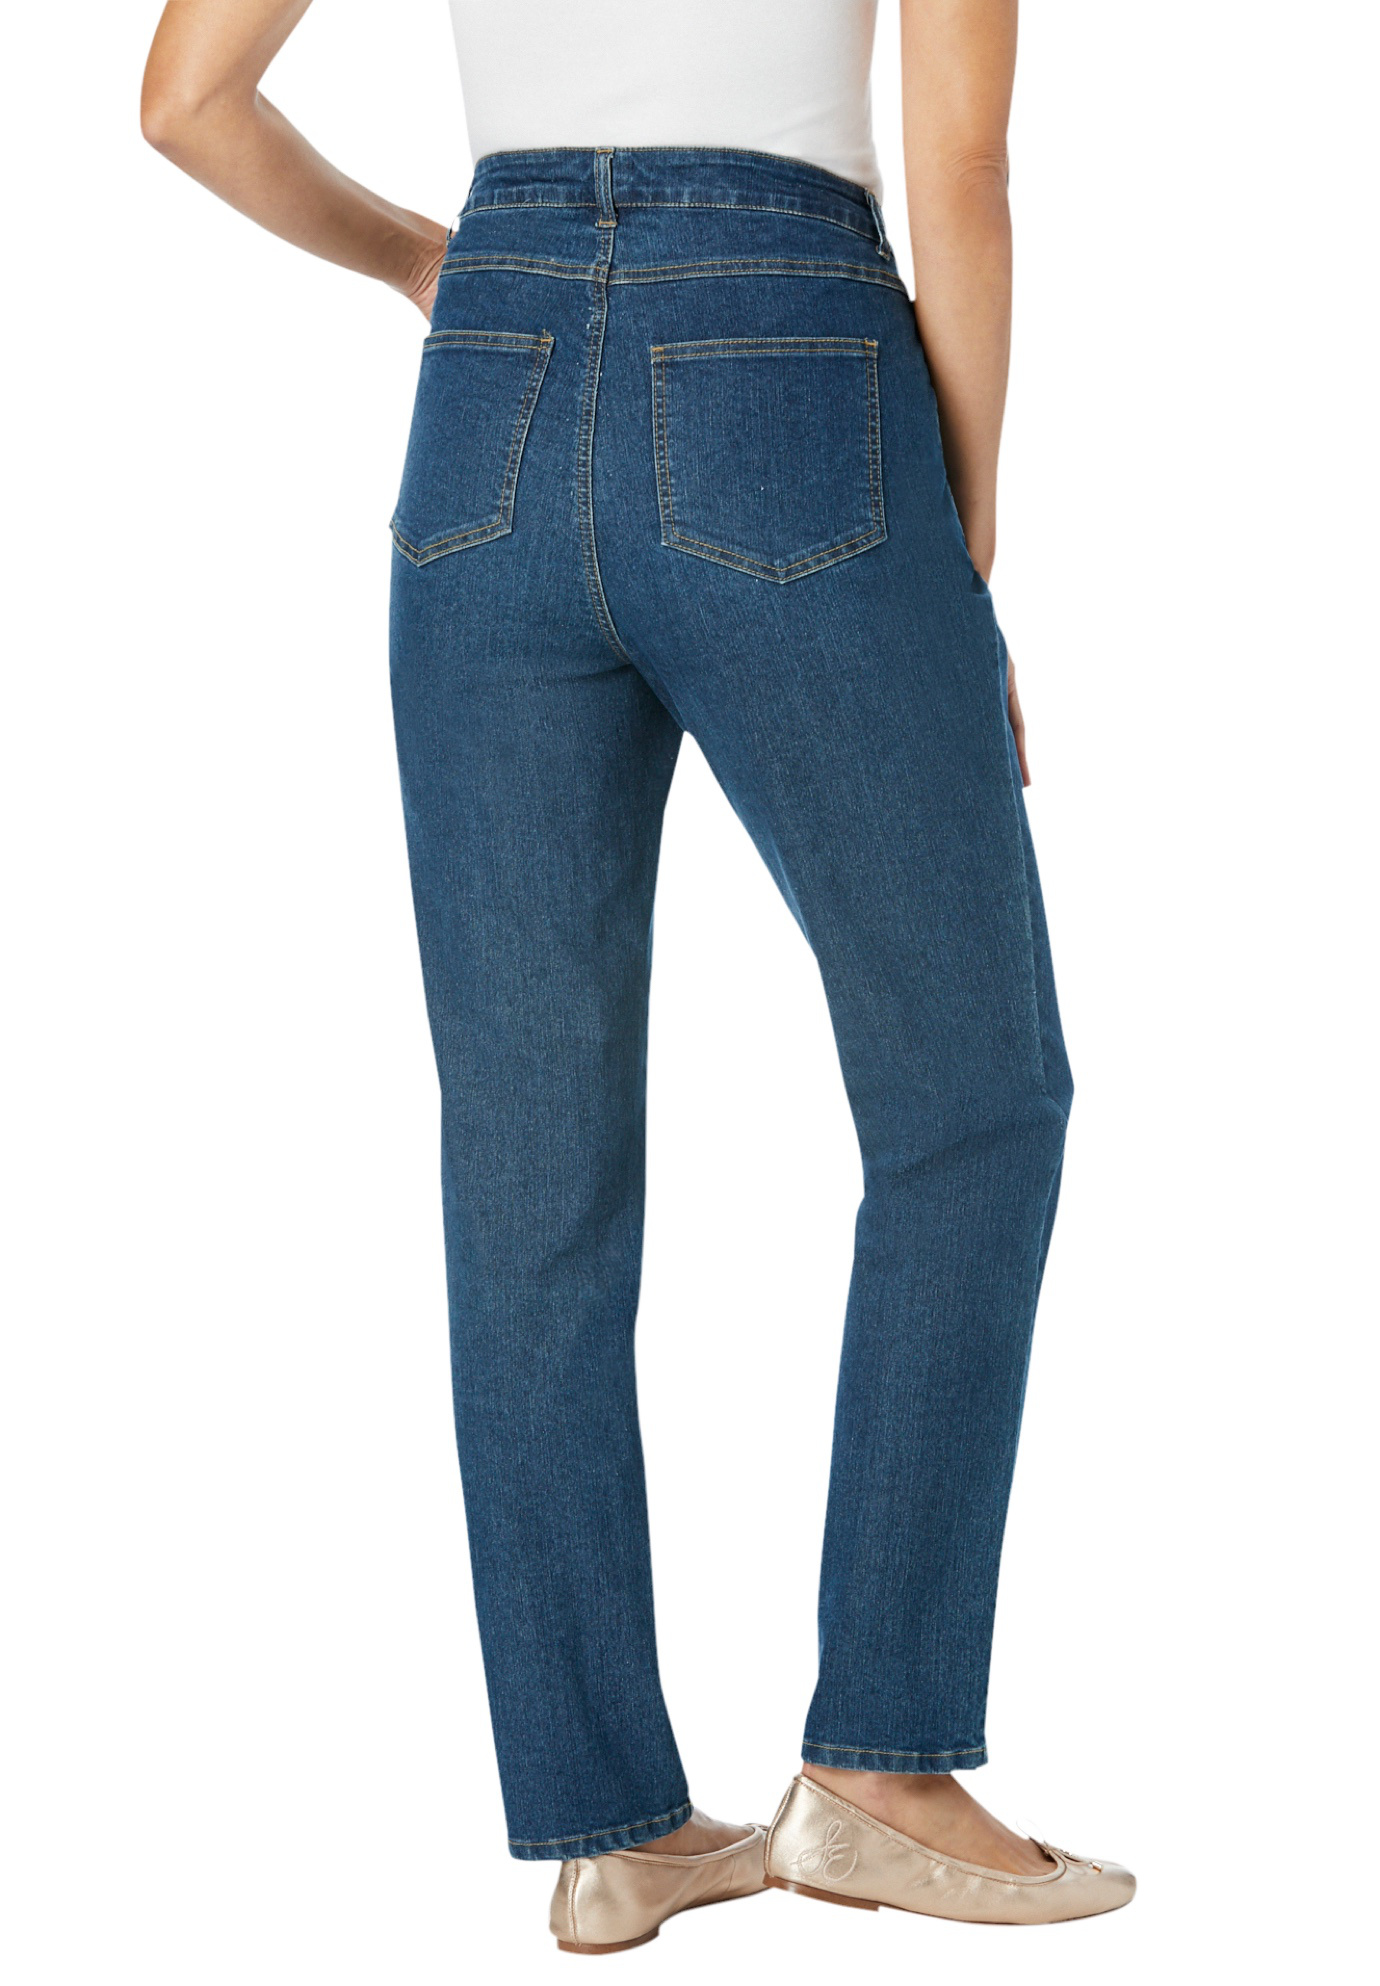 Woman Within Women's Plus Size Straight Leg Stretch Jean Jean - image 3 of 6